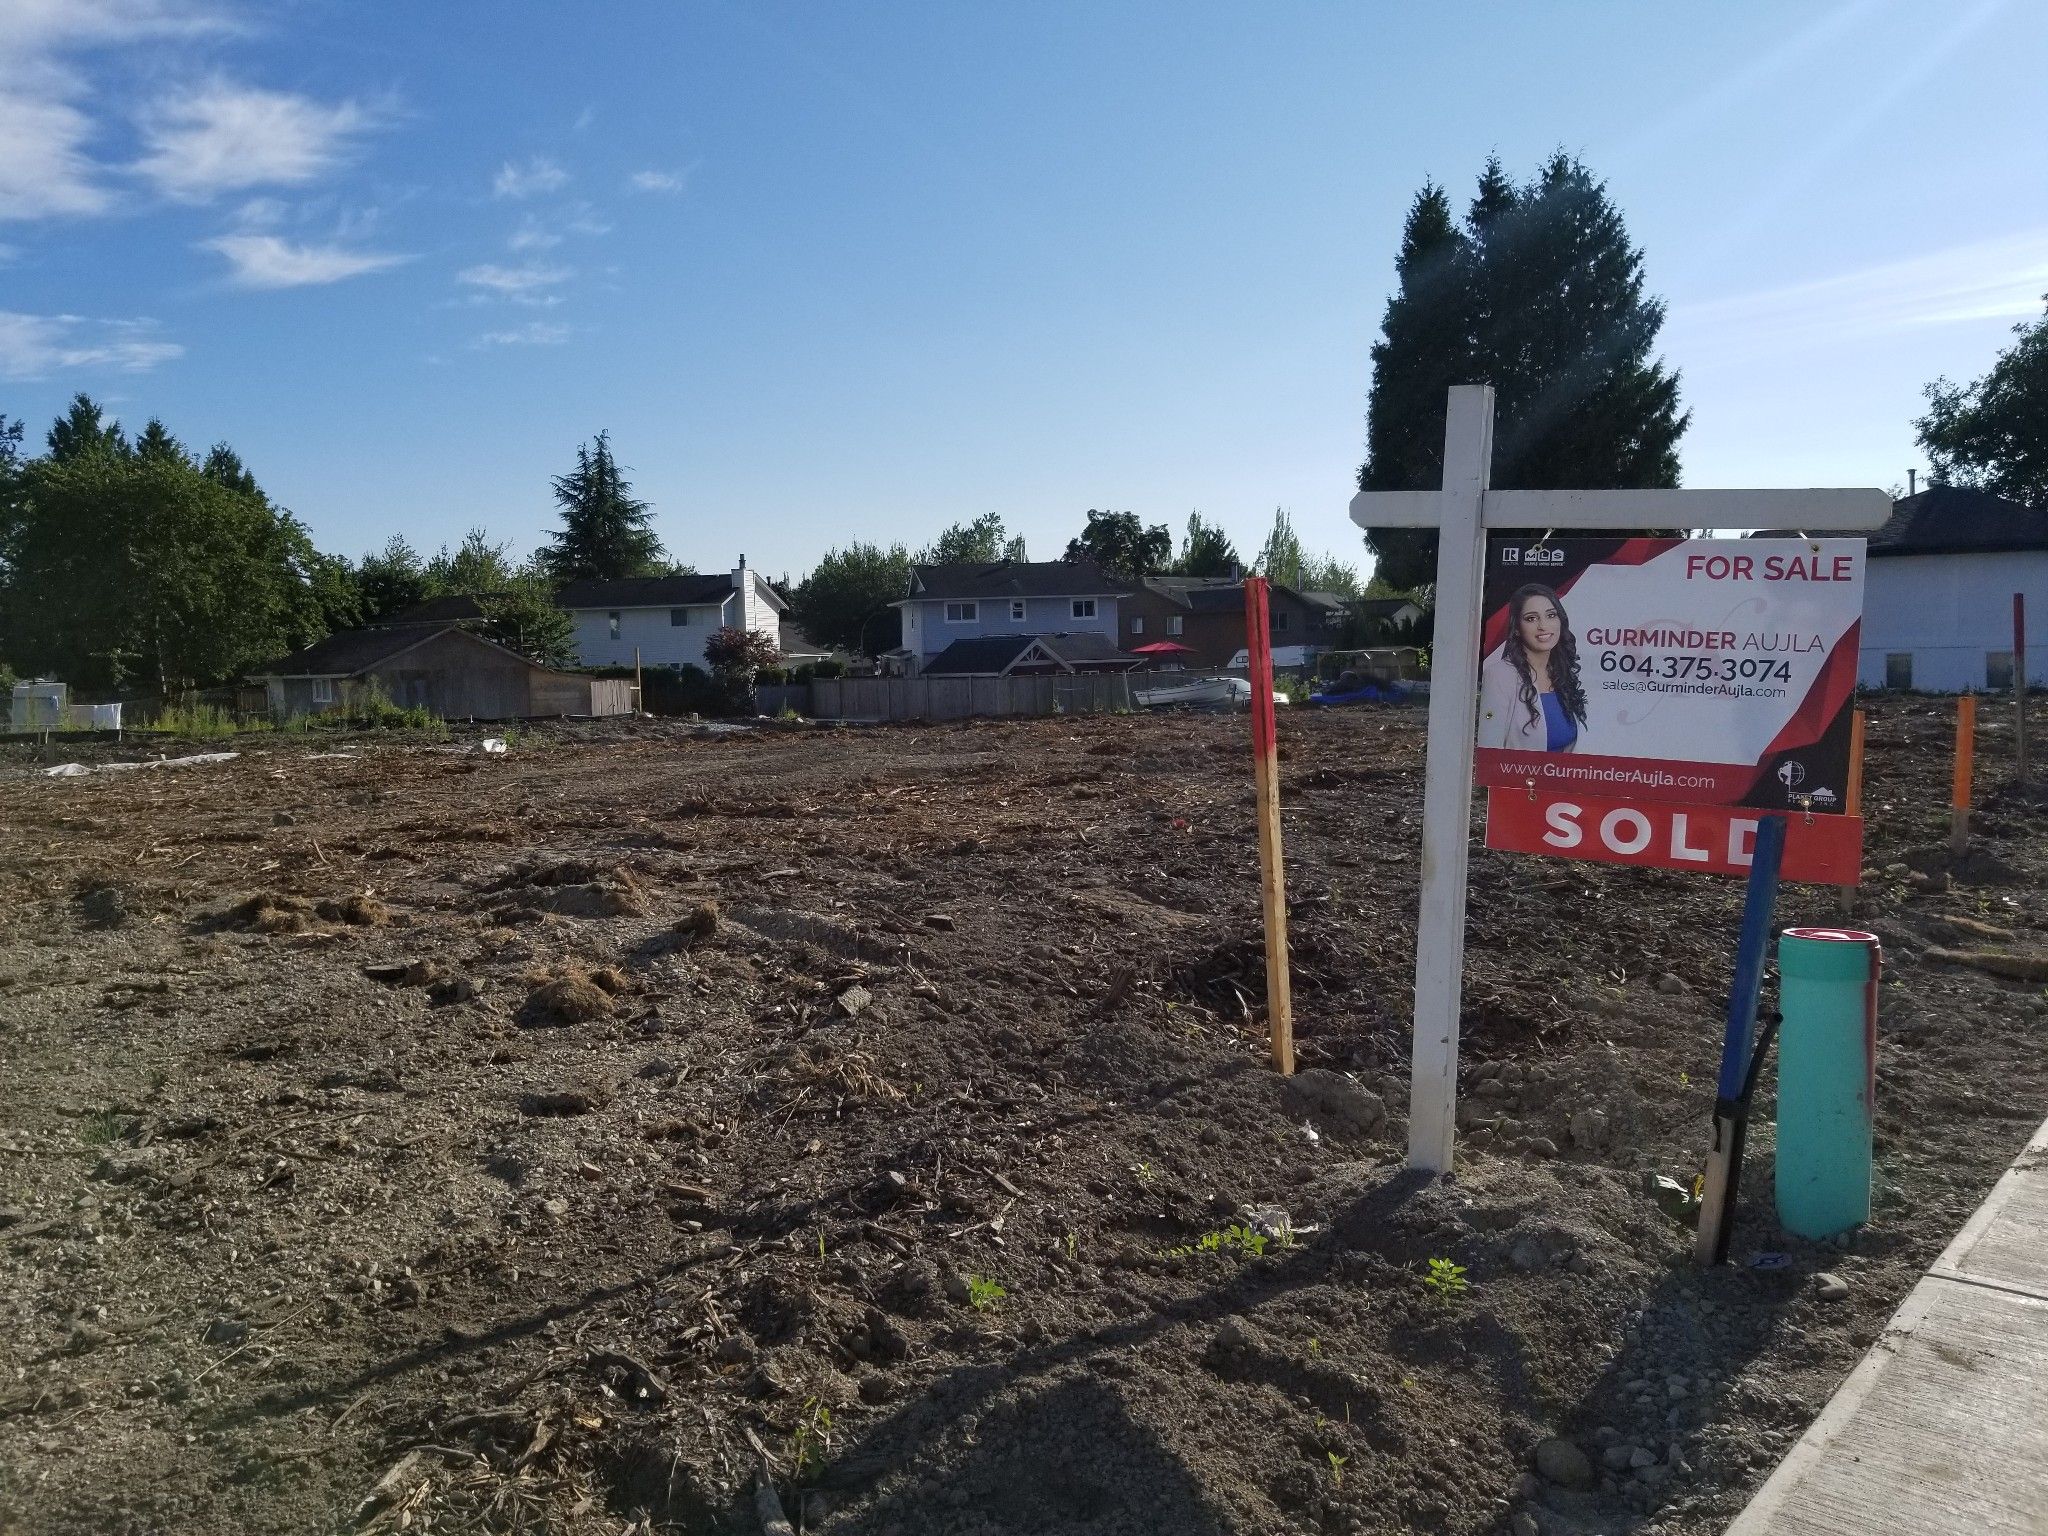 Main Photo: 18392 60Ave in Cloverdale: Cloverdale BC Land for sale